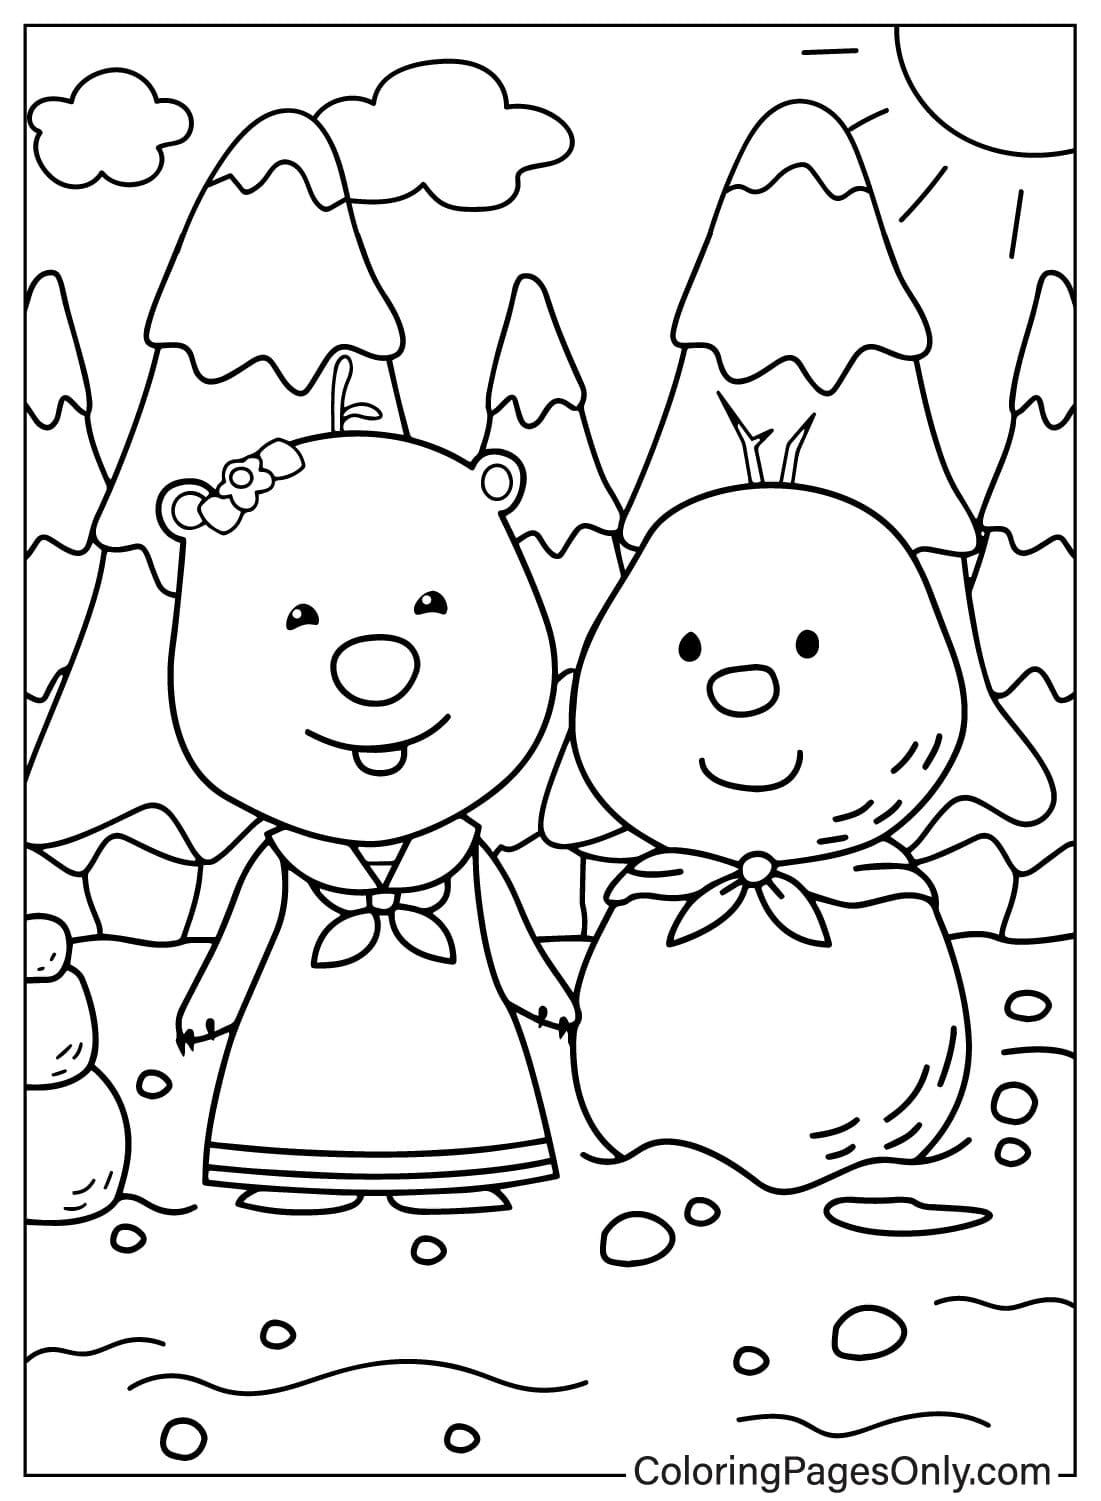 Loopy Coloring Page from Pororo the Little Penguin